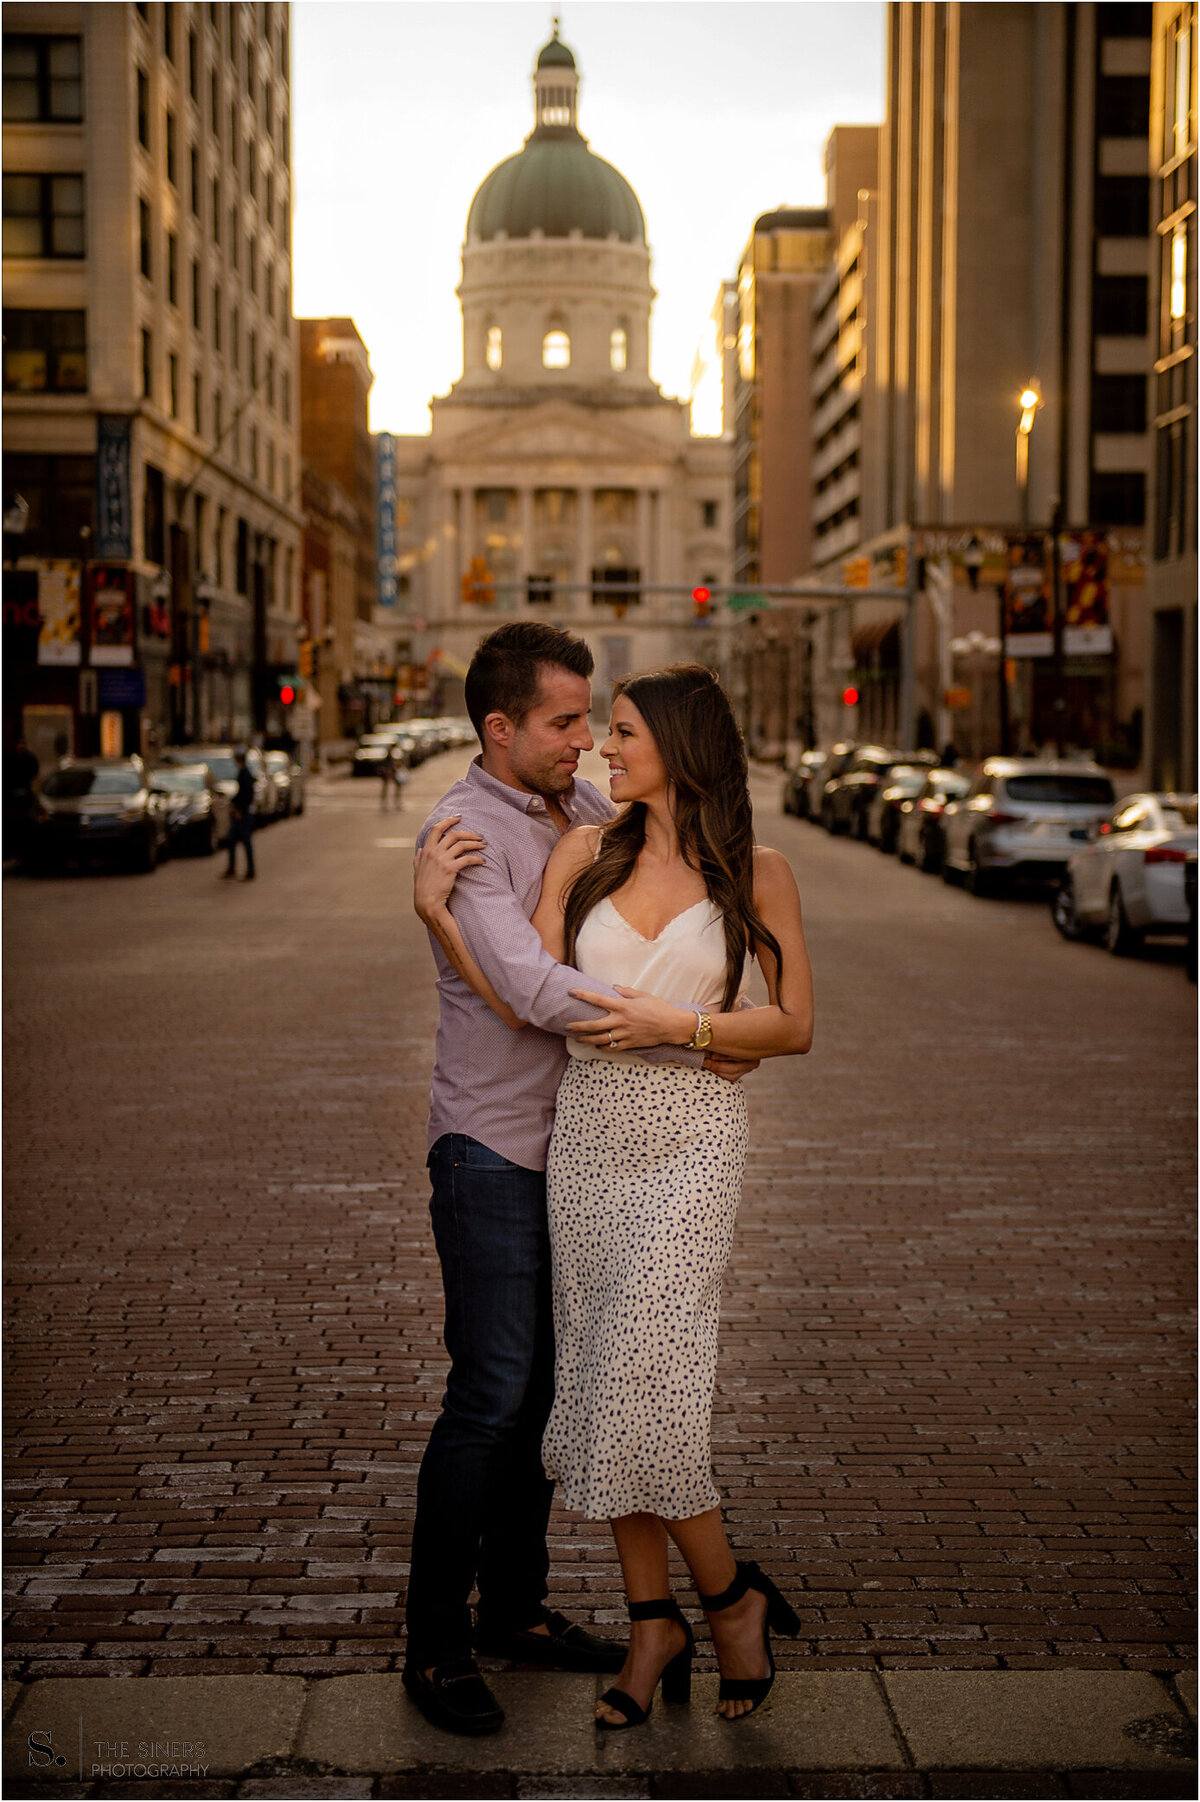 Siners Photography | Indianapolis Wedding Photographer | Downtown Indy Engagement | Event + Portrait Photography | Destination Photographer_0034